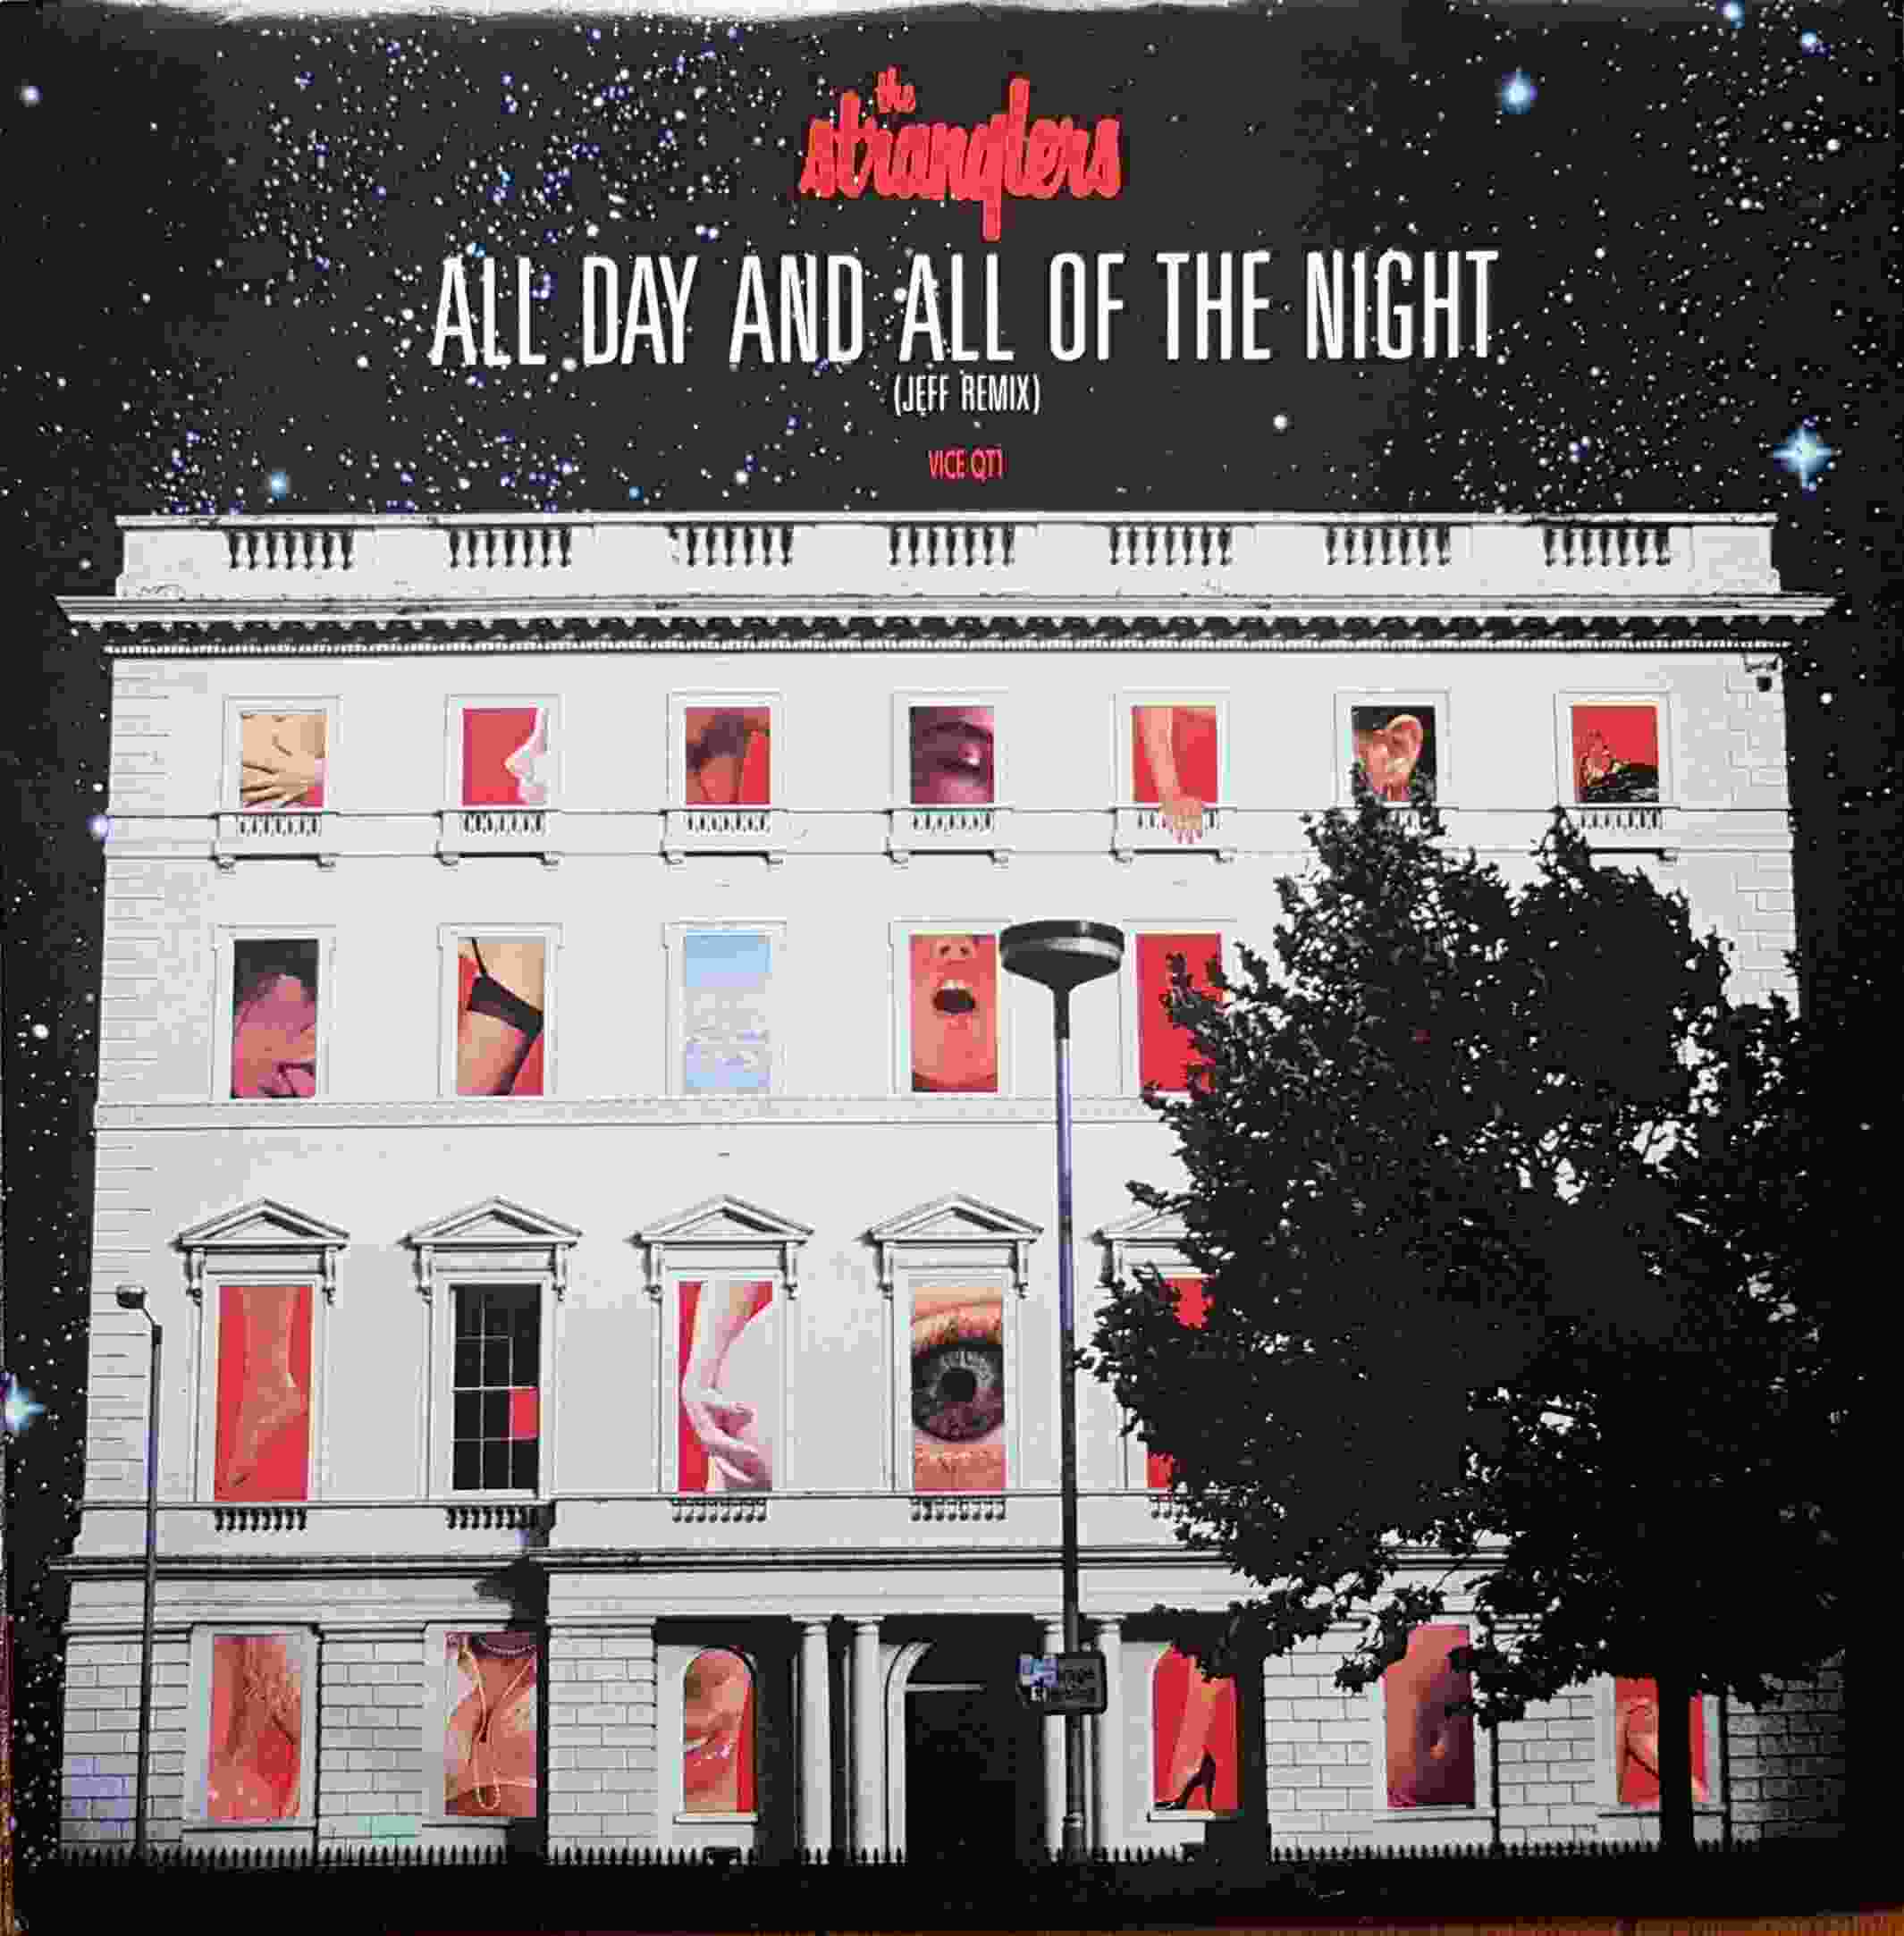 Picture of VICE QT 1 All day and all of the night by artist The Stranglers  from The Stranglers